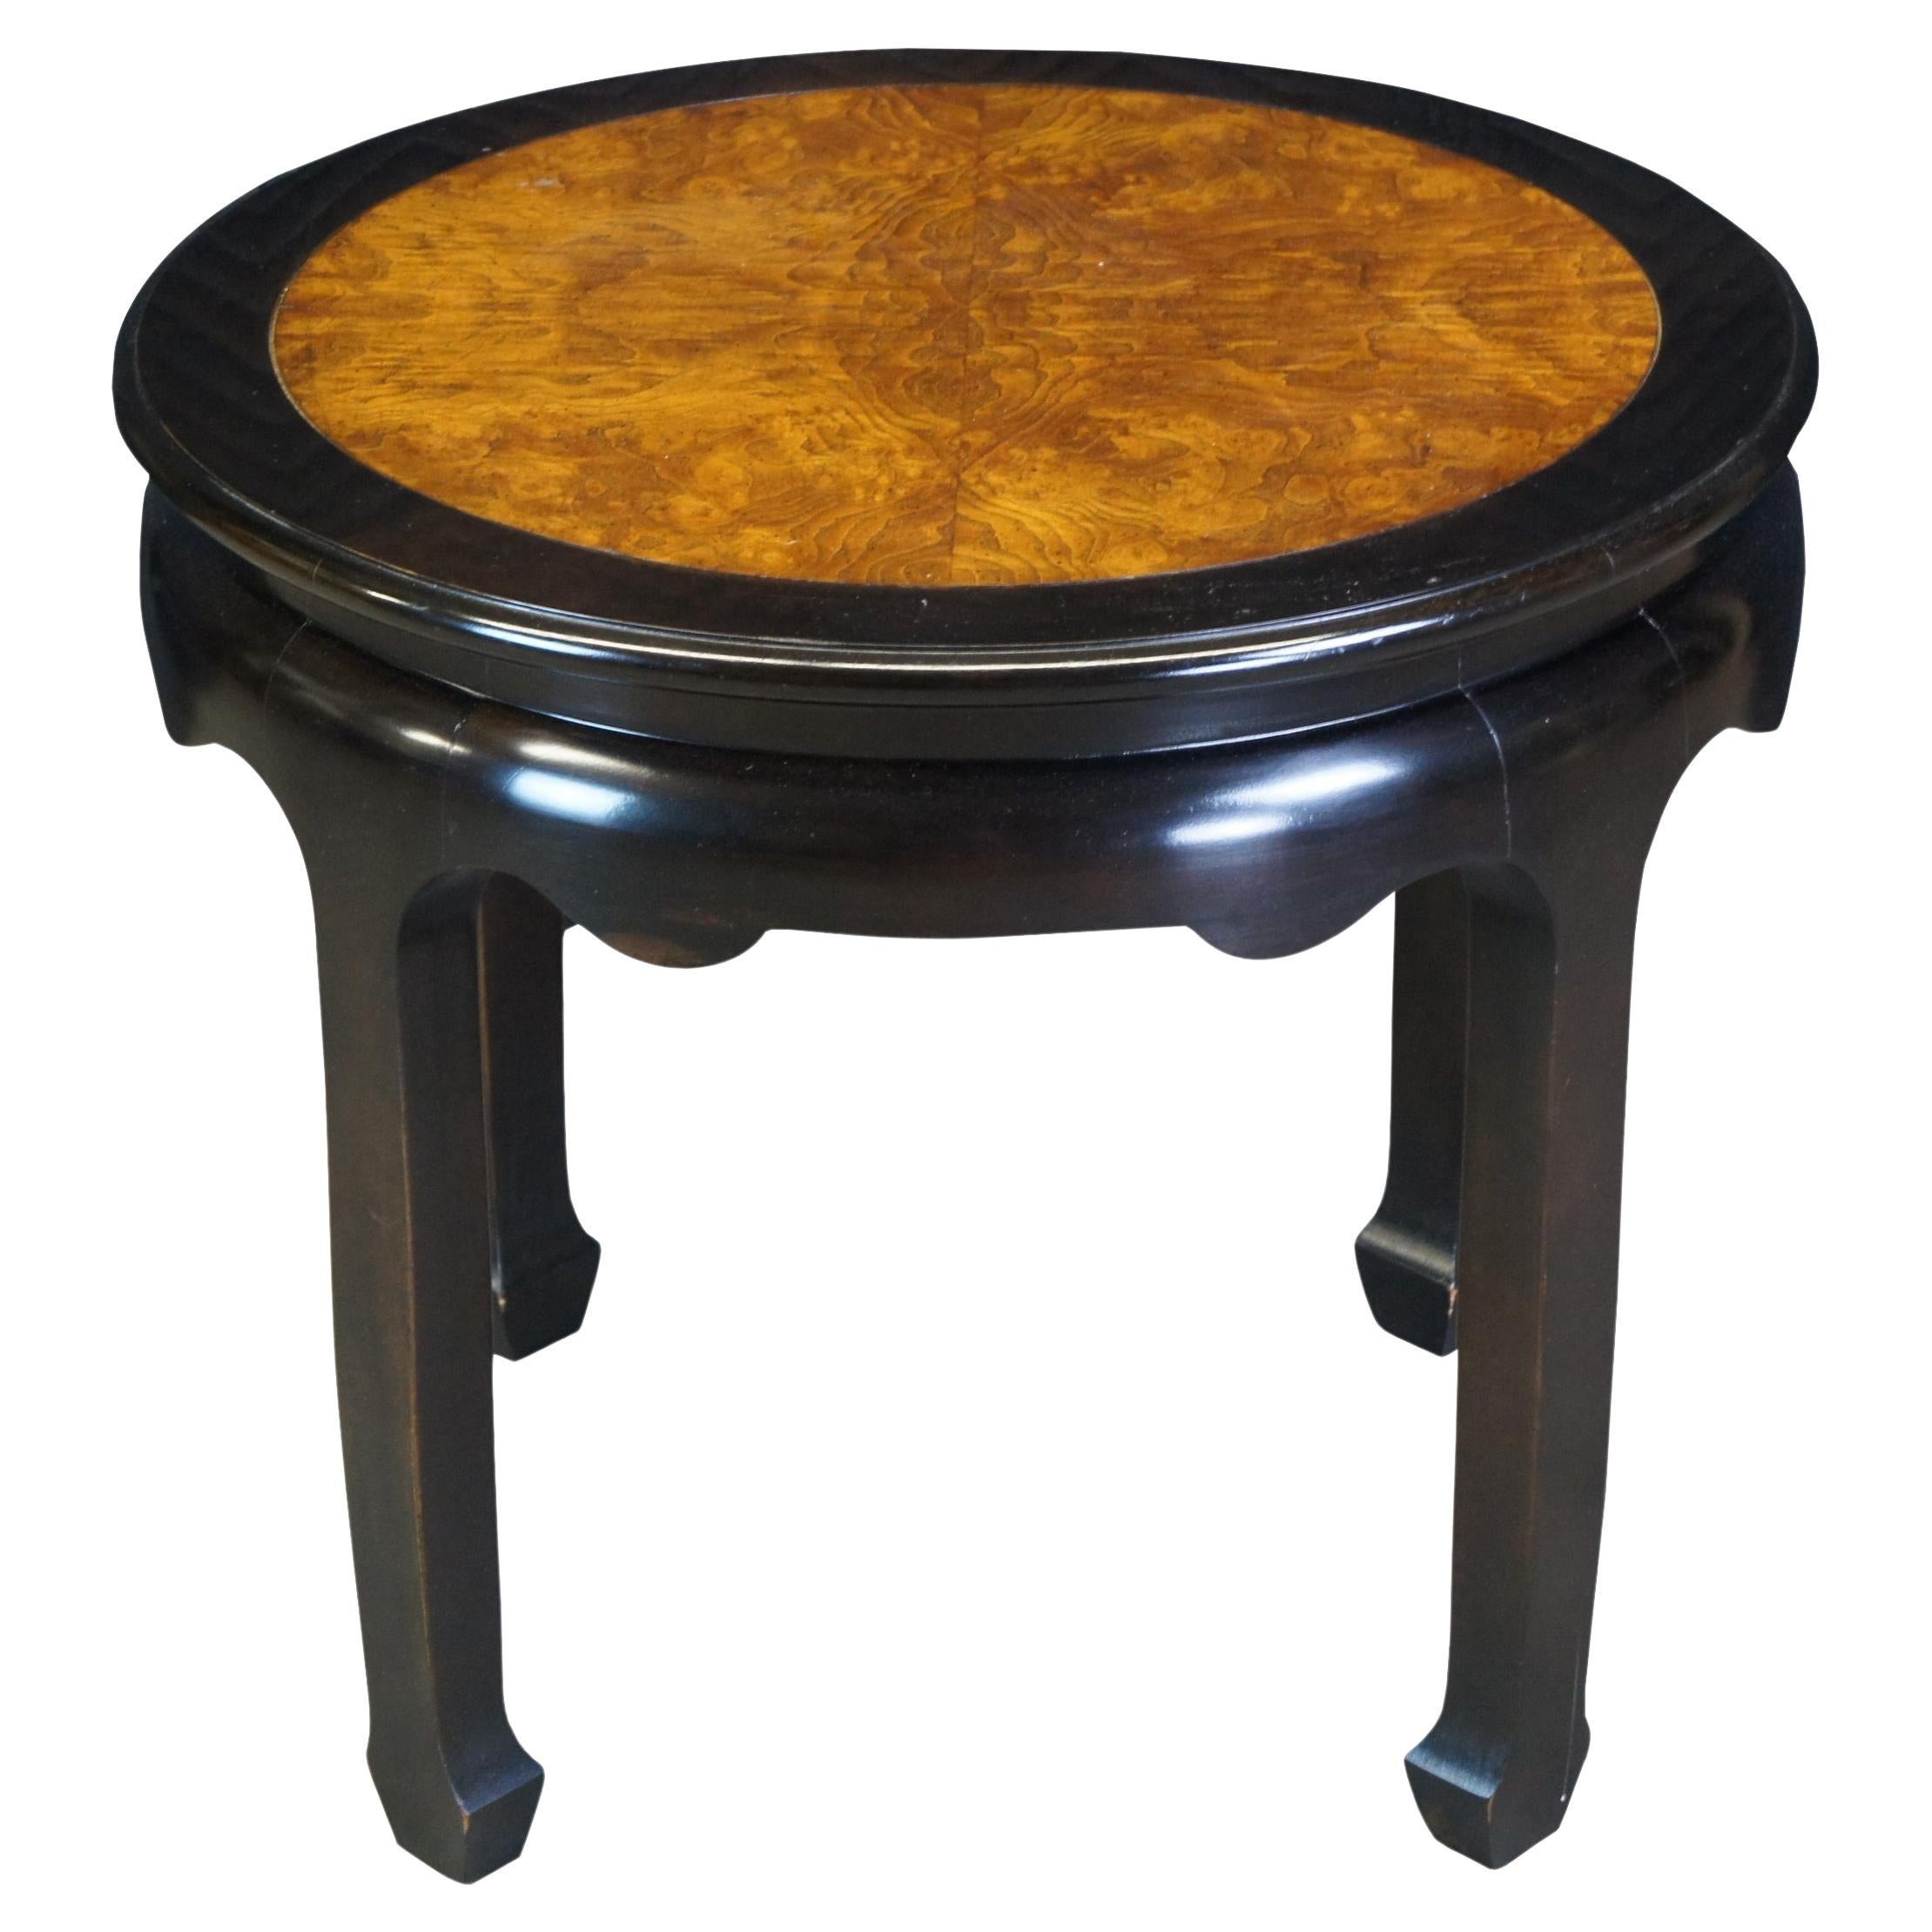 Vintage Century Furniture Chin Hua collection table. Made of burl wood and black lacquer featuring round form with chinoiserie / Ming styling.
 